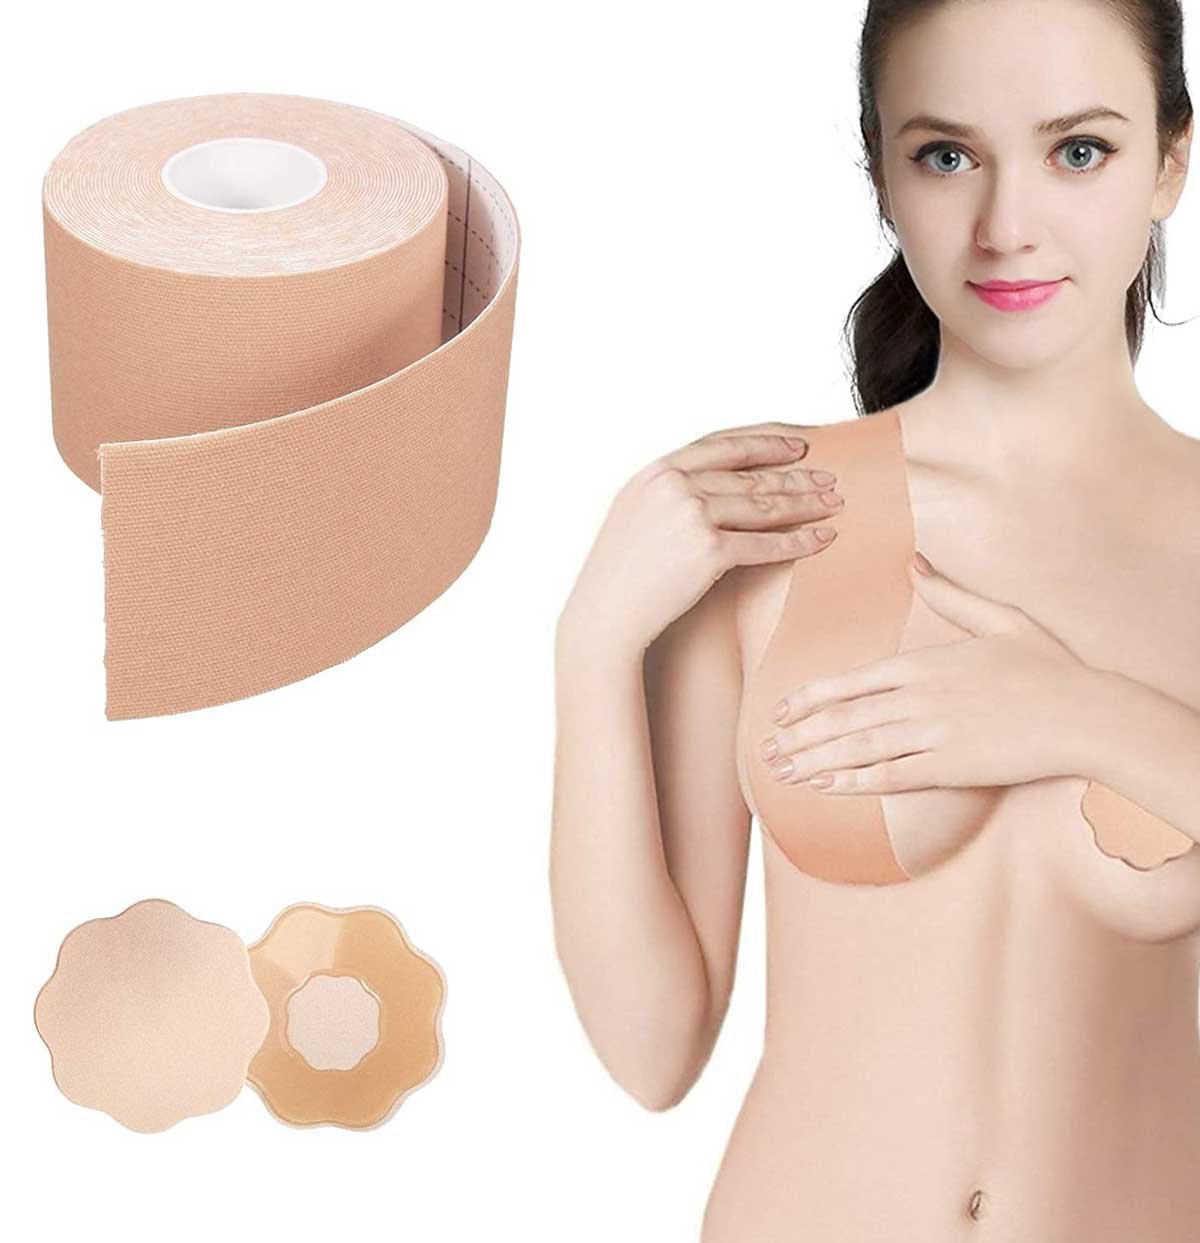 Benefits of using the boob tape